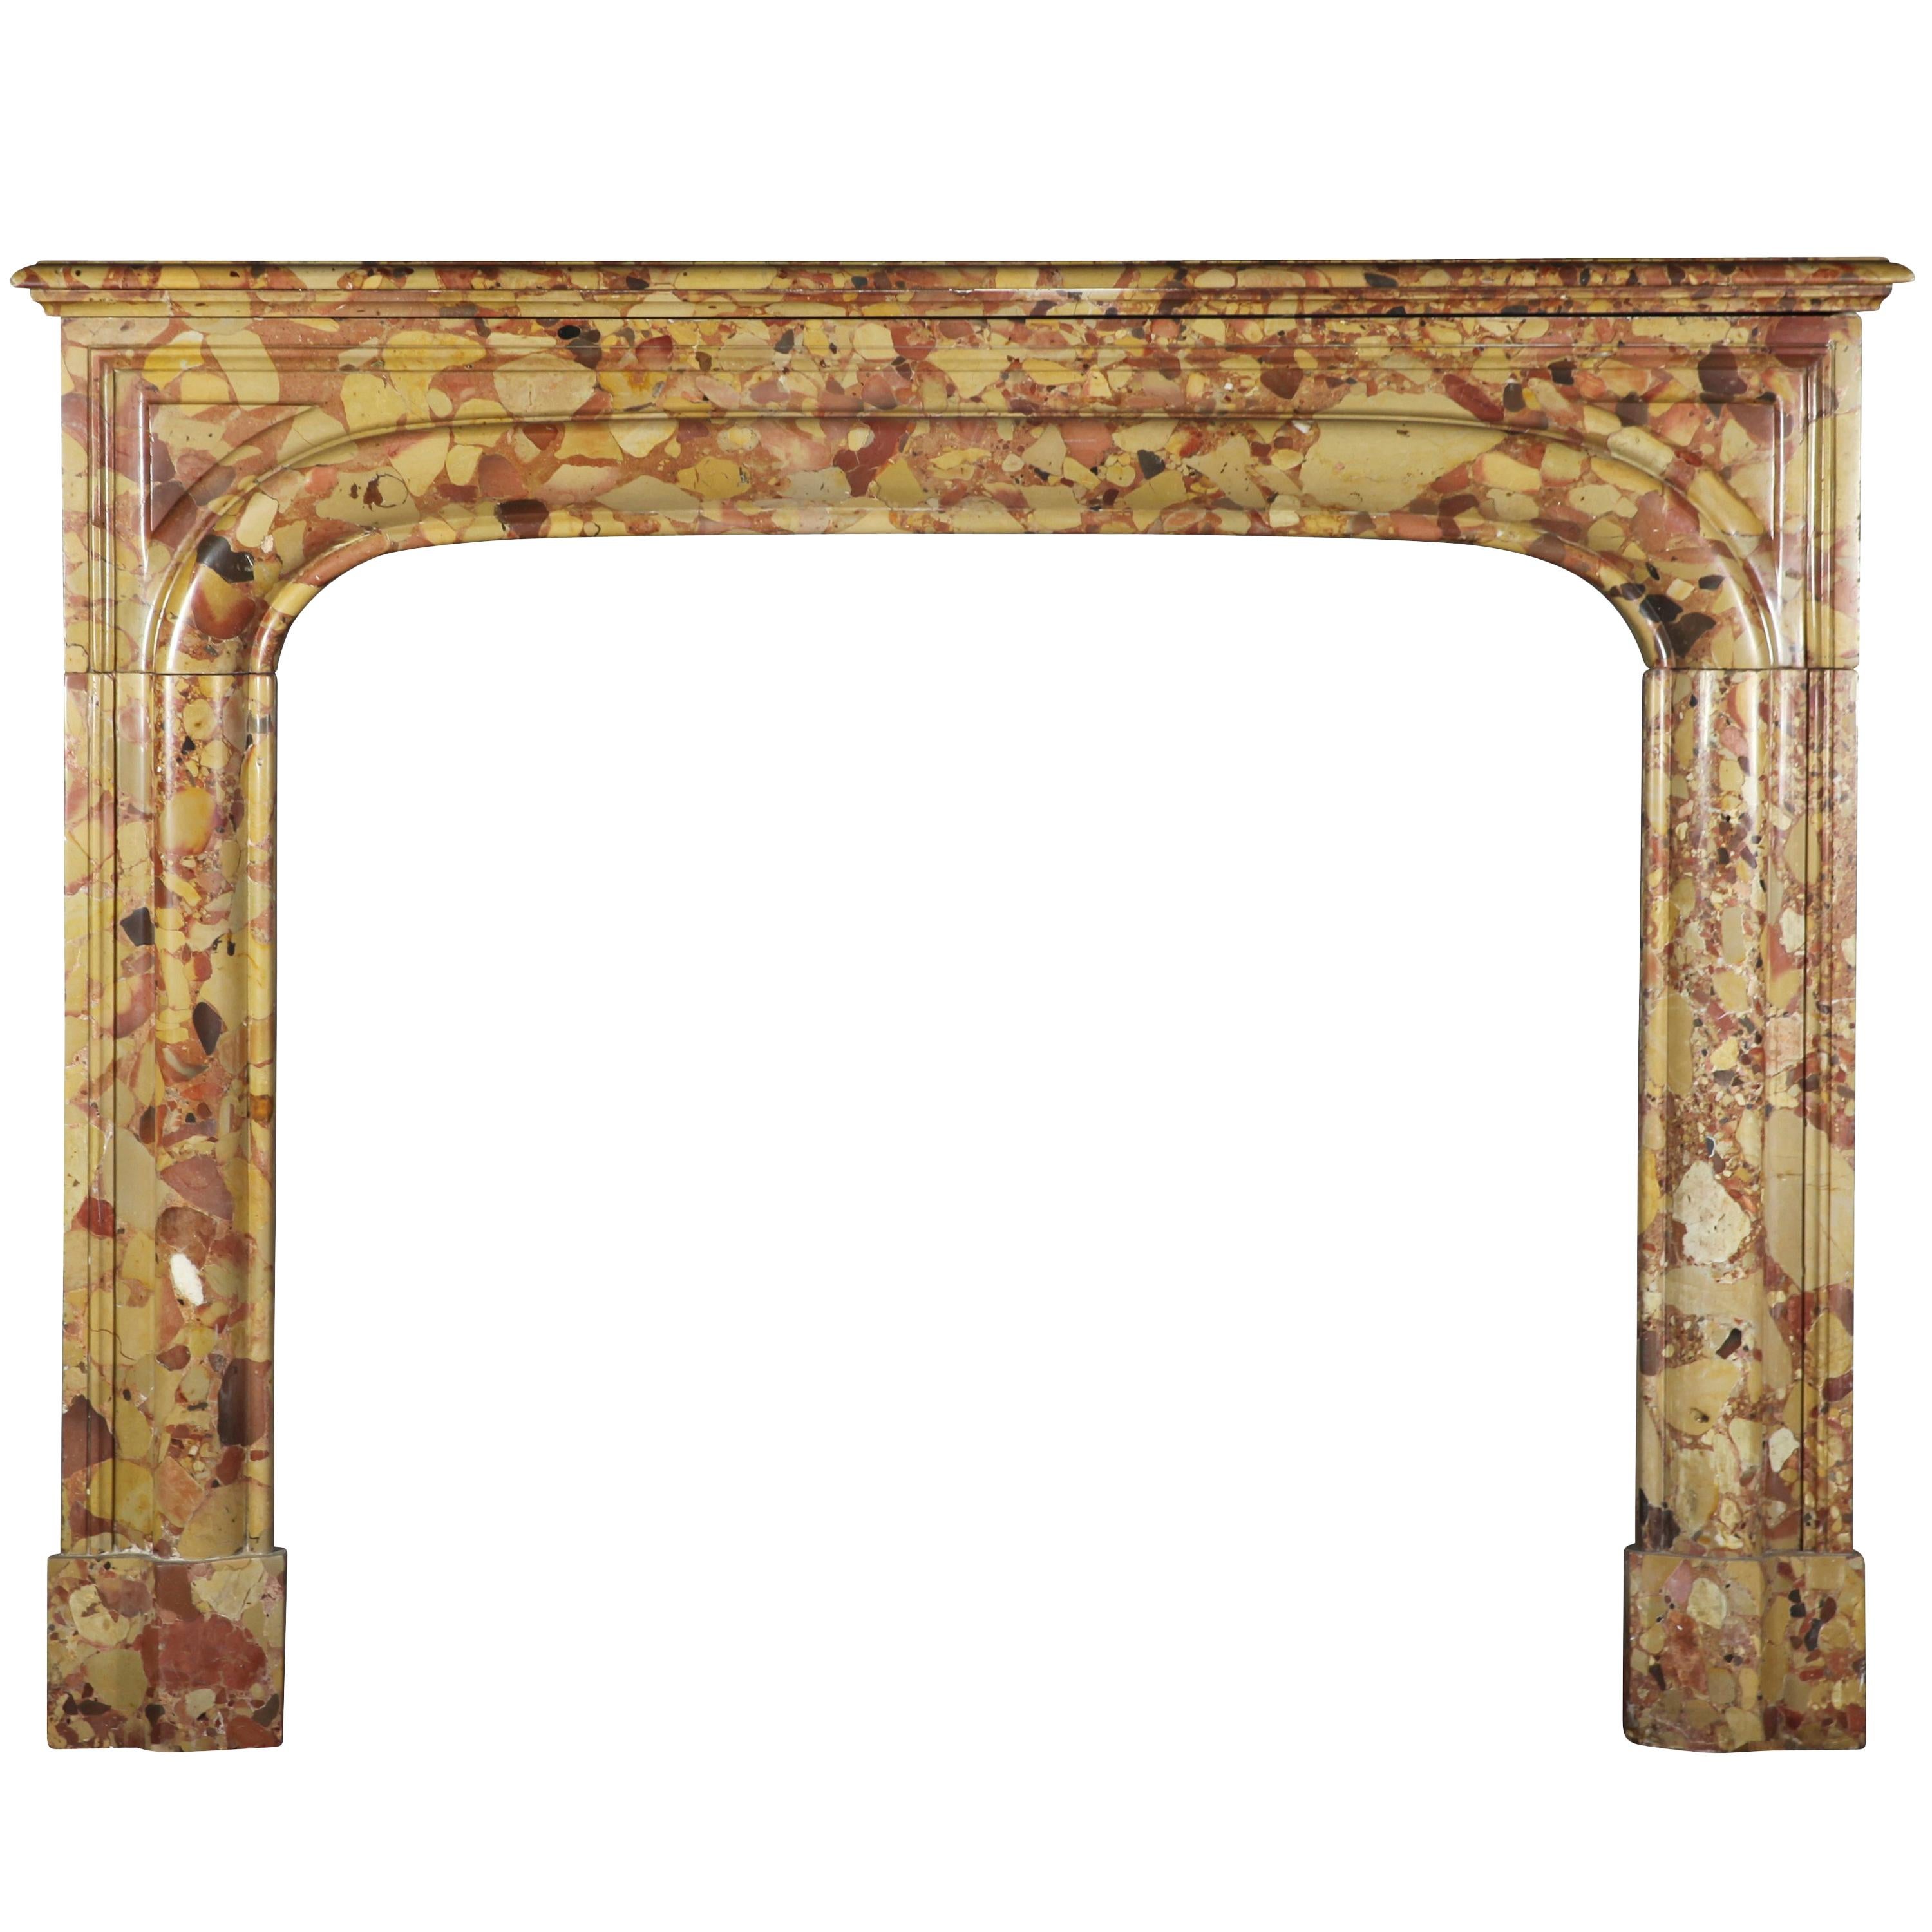 Classic French Antique Fireplace Surround in Royal Breche D'aleppo Marble